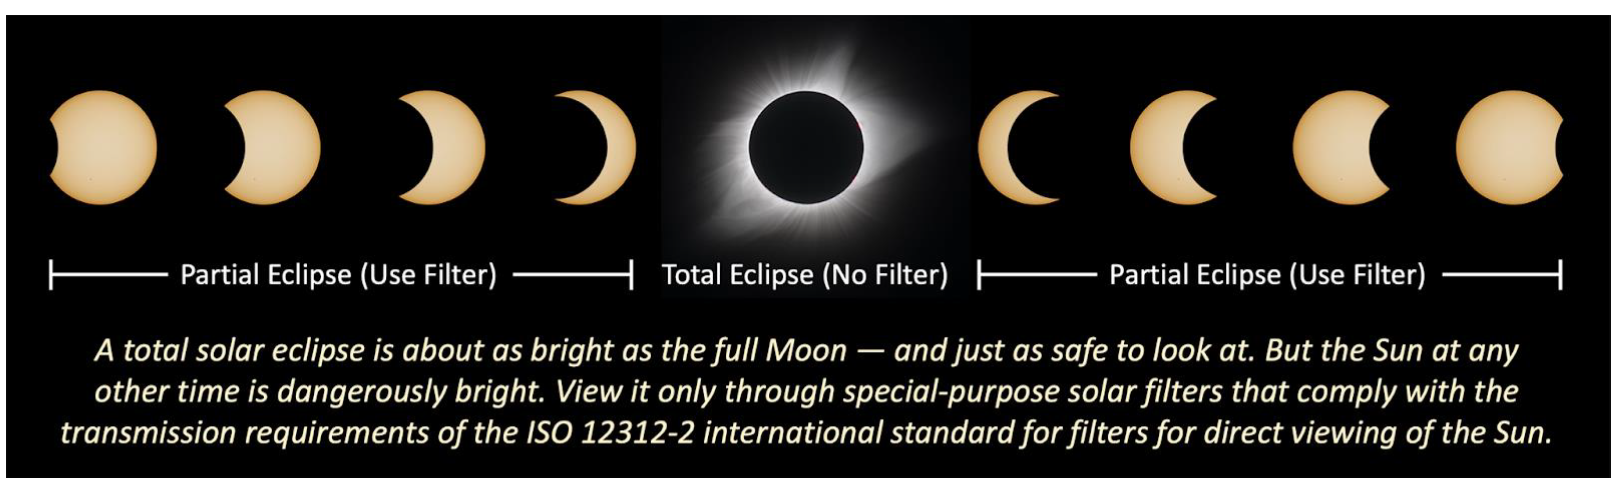 Progression of a total solar eclipse from partial to total and pack to partial. https://mynasadata.larc.nasa.gov/sites/default/files/inline-images/Total%20Eclipse%20Images%20to%20crop.png, Credit: American Astronomical Society